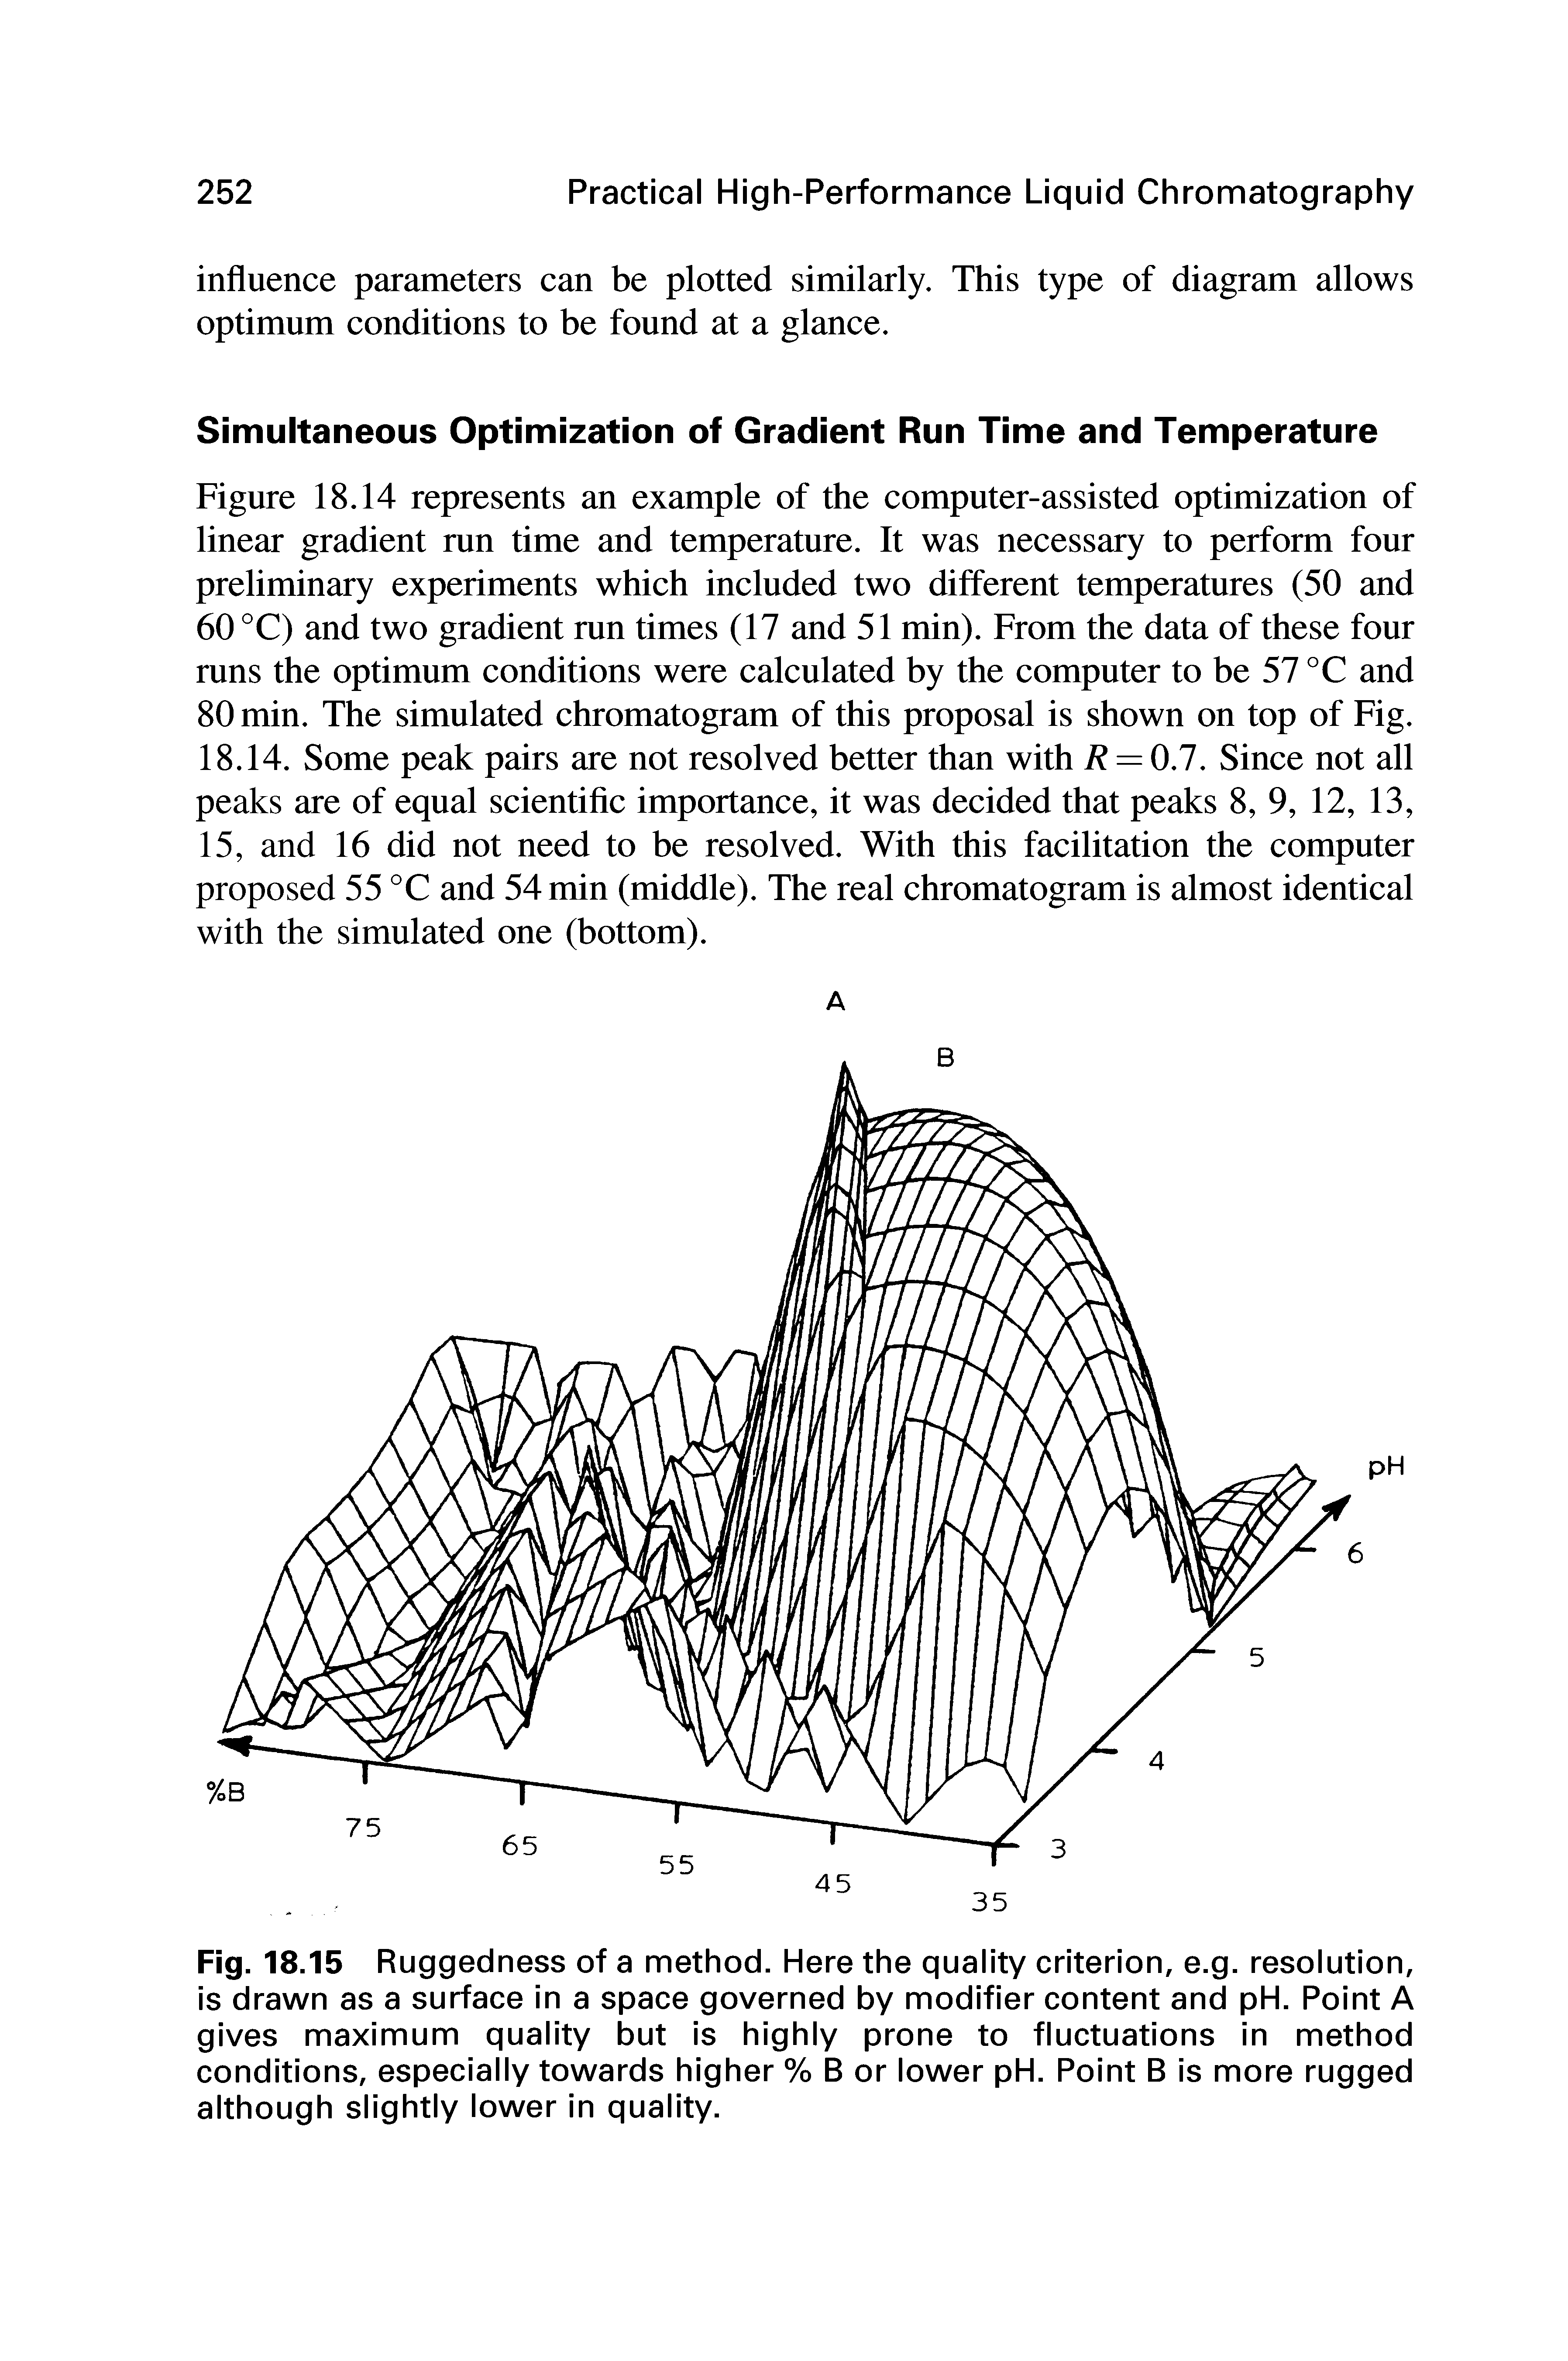 Figure 18.14 represents an example of the computer-assisted optimization of linear gradient run time and temperature. It was necessary to perform four preliminary experiments which included two different temperatures (50 and 60 °C) and two gradient run times (17 and 51 min). From the data of these four runs the optimum conditions were calculated by the computer to be 57 °C and 80 min. The simulated chromatogram of this proposal is shown on top of Fig. 18.14. Some peak pairs are not resolved better than with R = 0.7. Since not all peaks are of equal scientific importance, it was decided that peaks 8, 9, 12, 13, 15, and 16 did not need to be resolved. With this facilitation the computer proposed 55 °C and 54 nun (nuddle). The real chromatogram is almost identical with the simulated one (bottom).